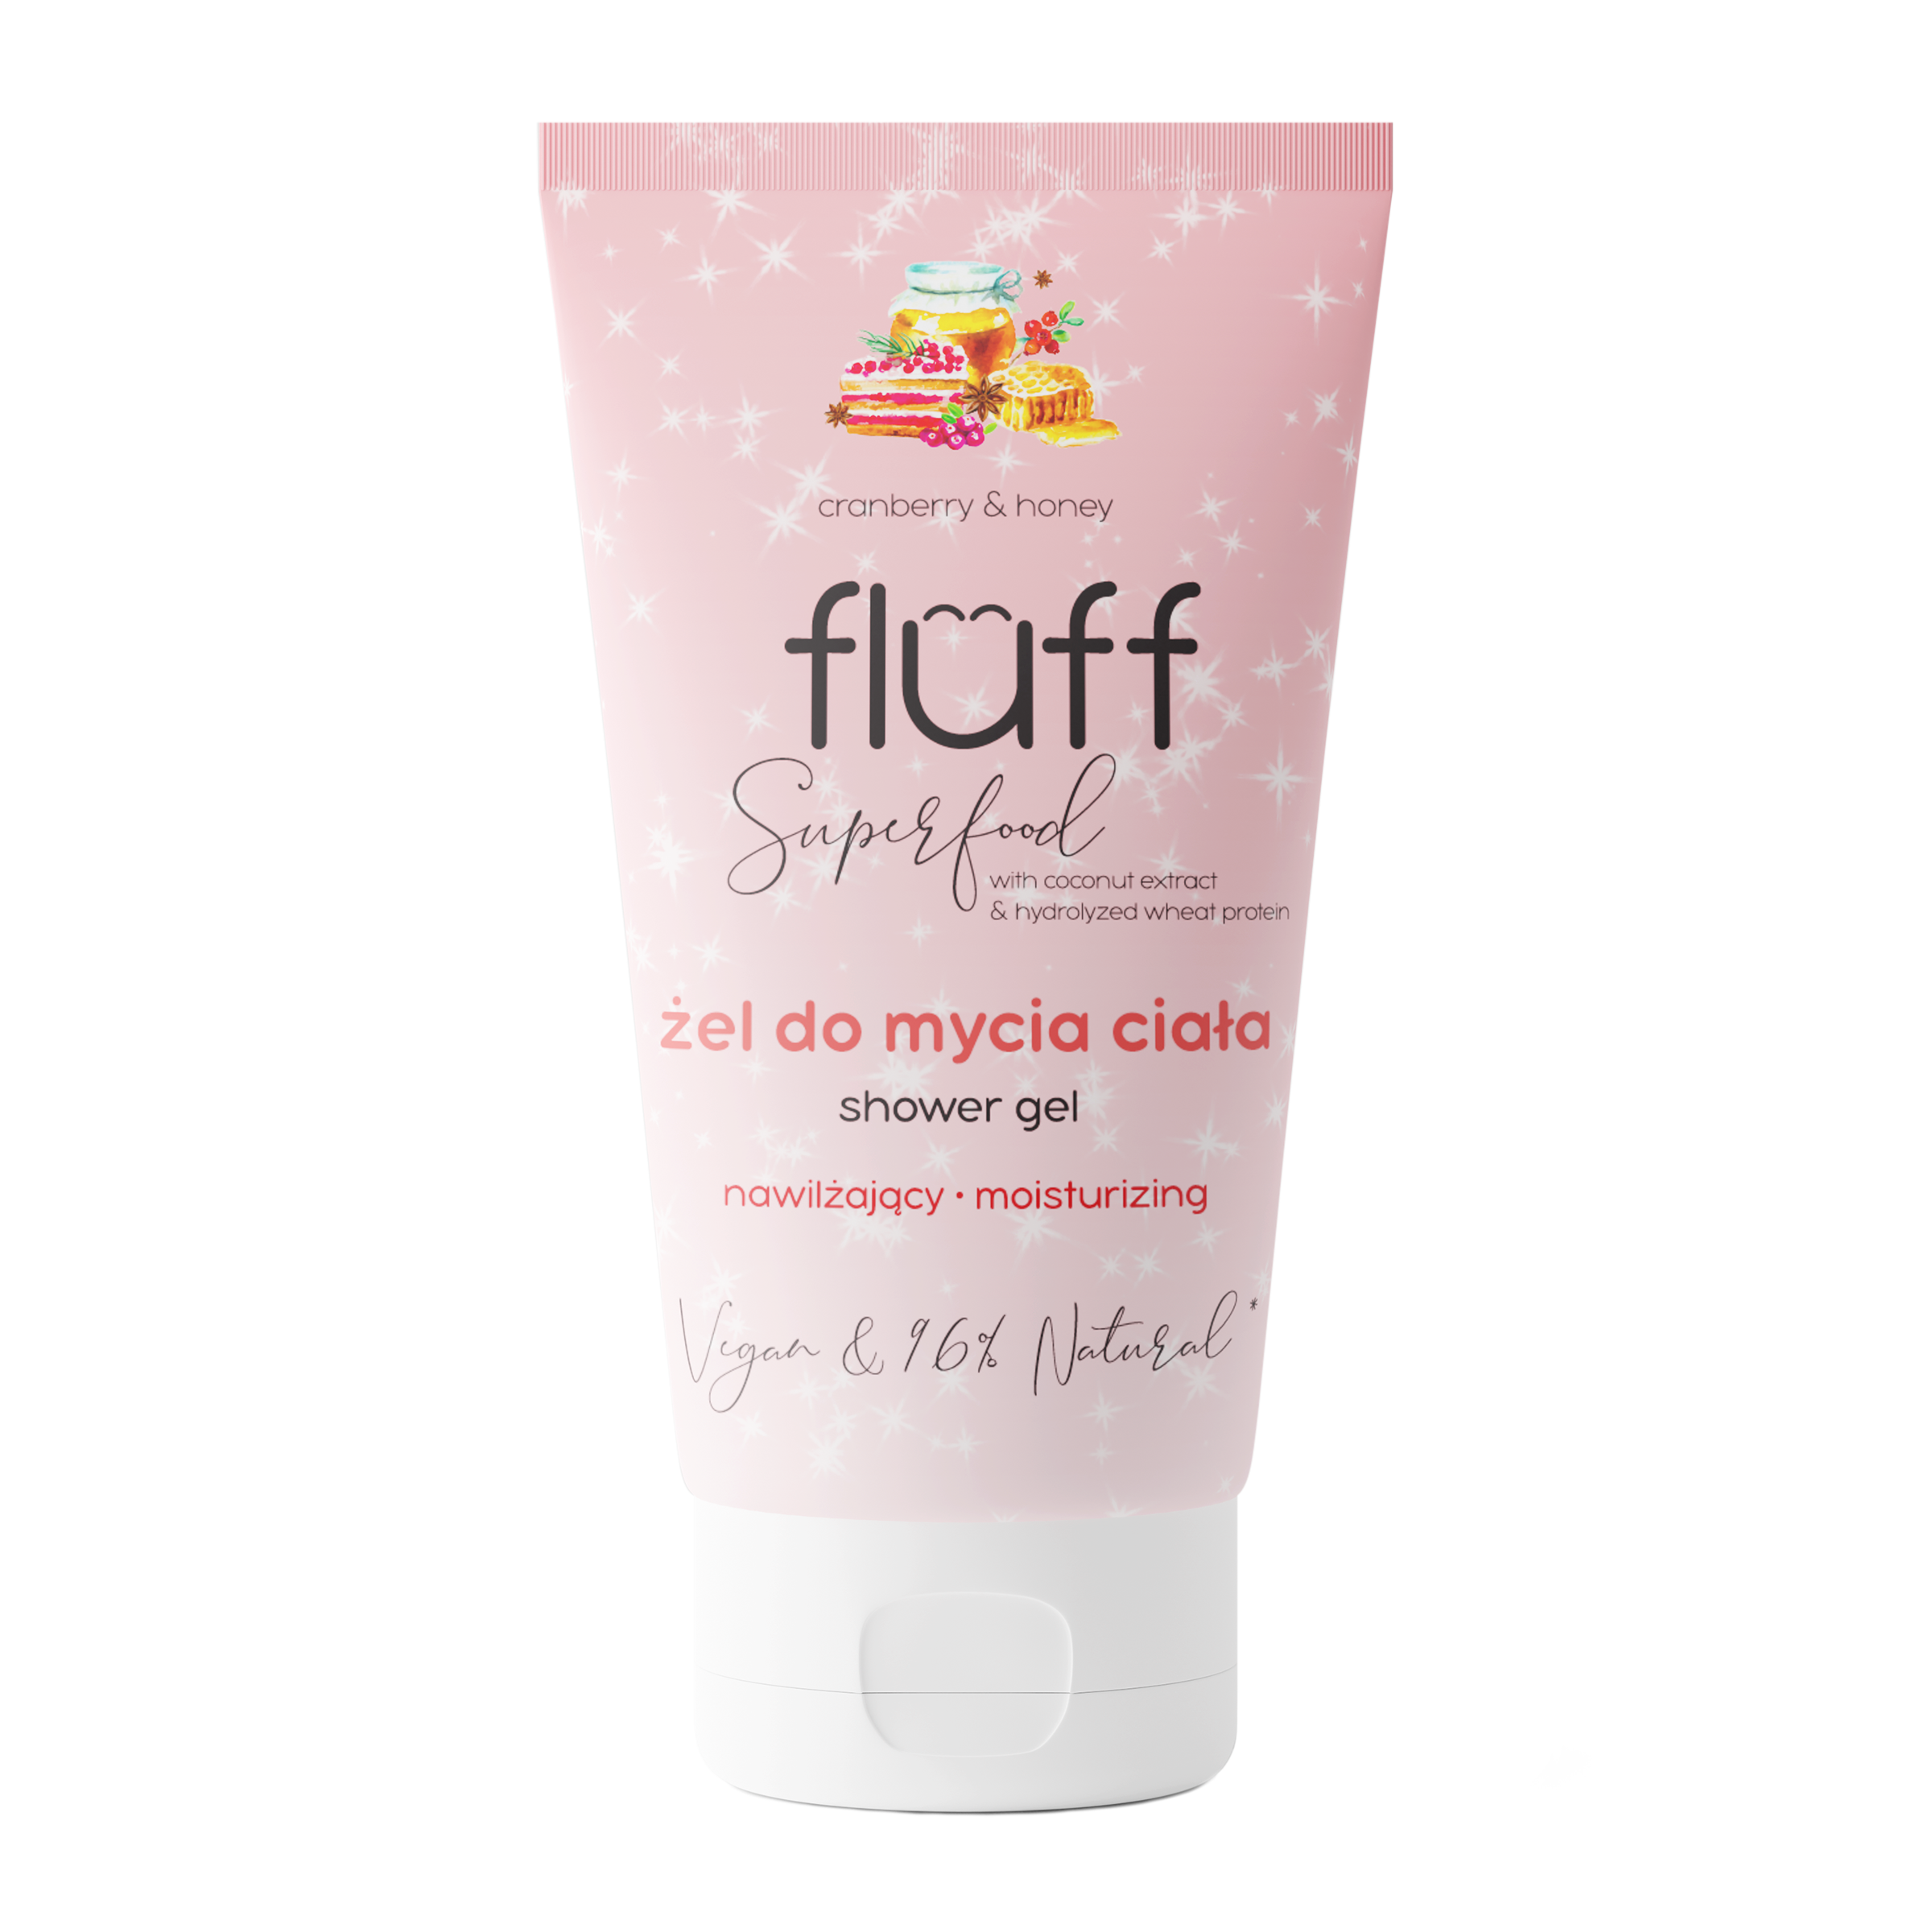 Fluff_Body_Care_Set_Festive_Relax_Limited_Edition_d